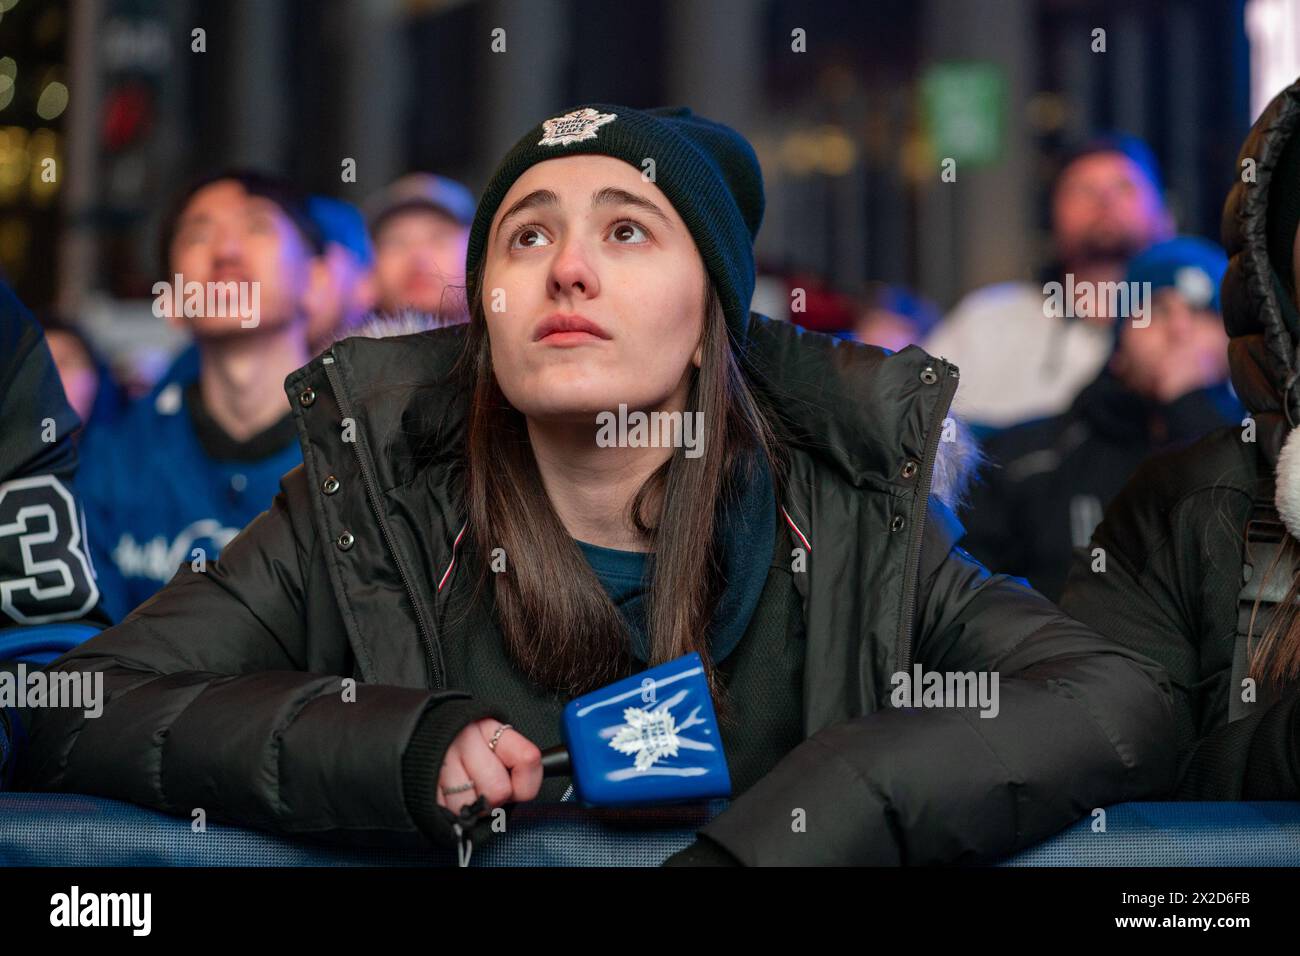 Fans watching the game on a giant screen react as the Boston Bruins score a goal against the Toronto Maple Leafs at Maple Leaf Square outside Scotiabank Arena. During Toronto Maple Leafs playoff games, Maple Leaf Square transforms into a sea of blue and white, echoing with the chants of passionate fans eagerly rallying behind their team's quest for victory. The electric atmosphere radiates anticipation and excitement, creating unforgettable memories for both die-hard supporters and casual observers alike. (Photo by Shawn Goldberg/SOPA Images/Sipa USA) Stock Photo